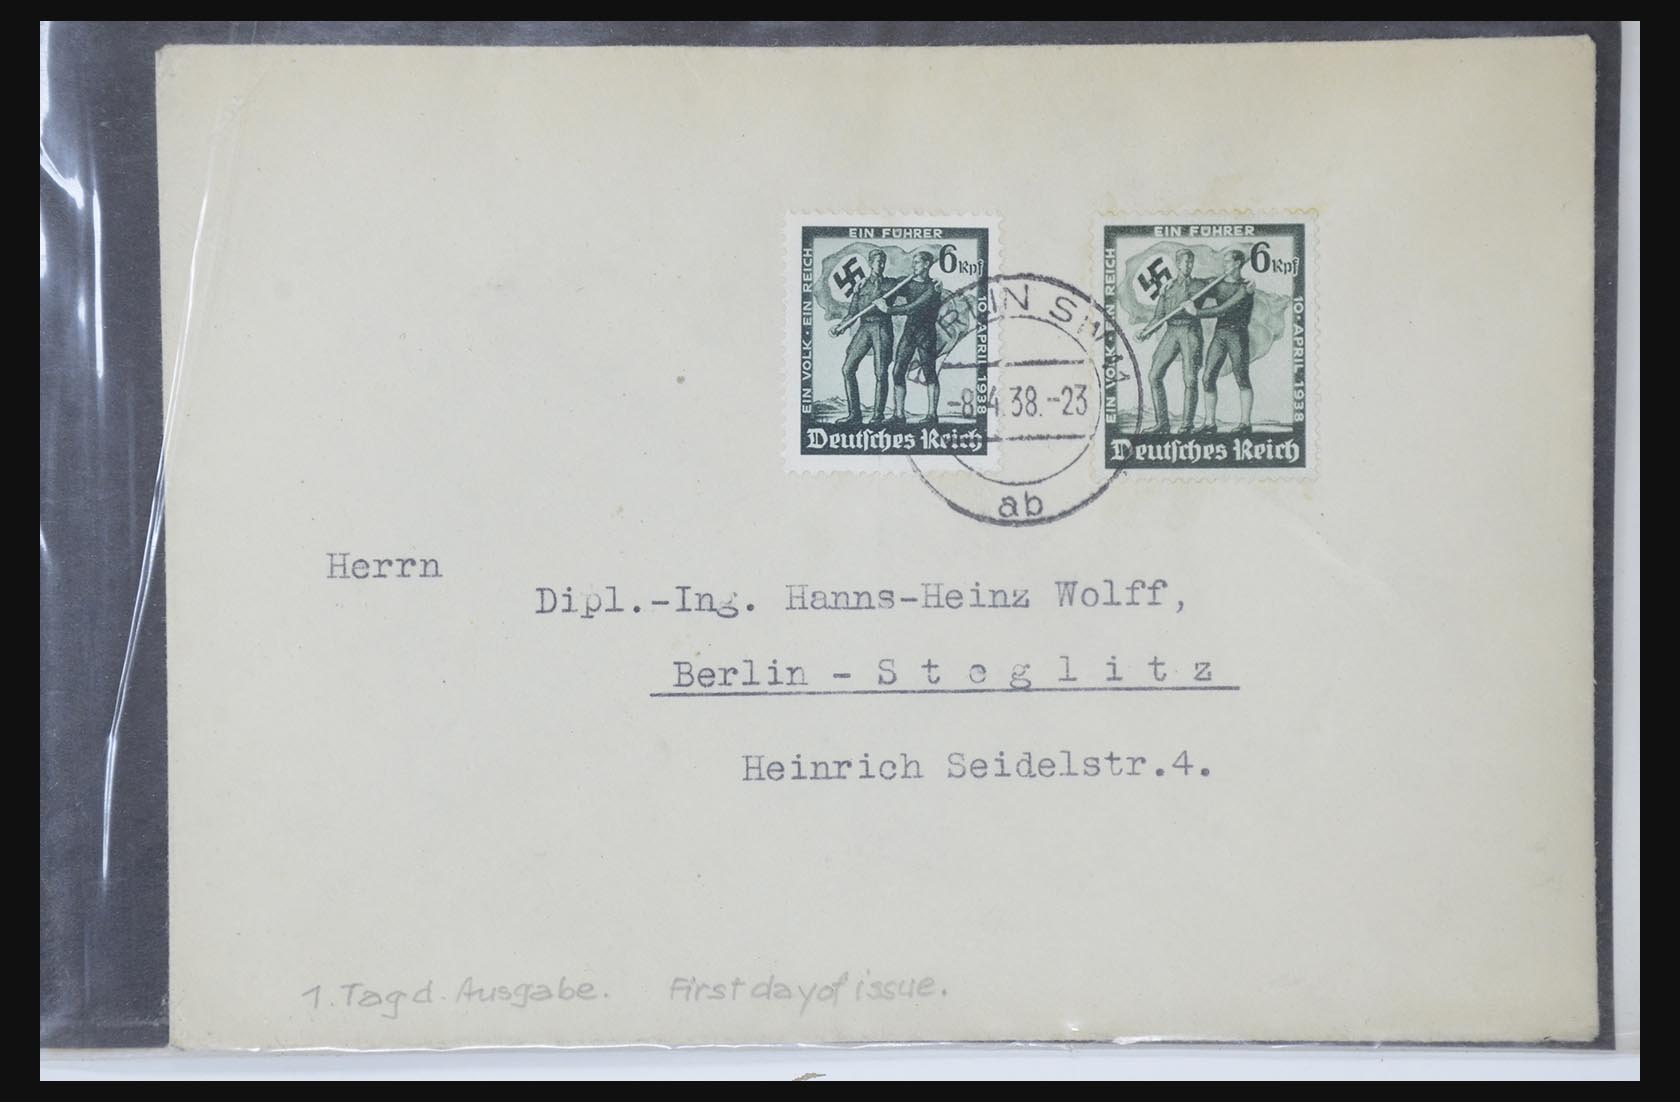 31581 055 - 31581 Germany covers and FDC's 1945-1981.